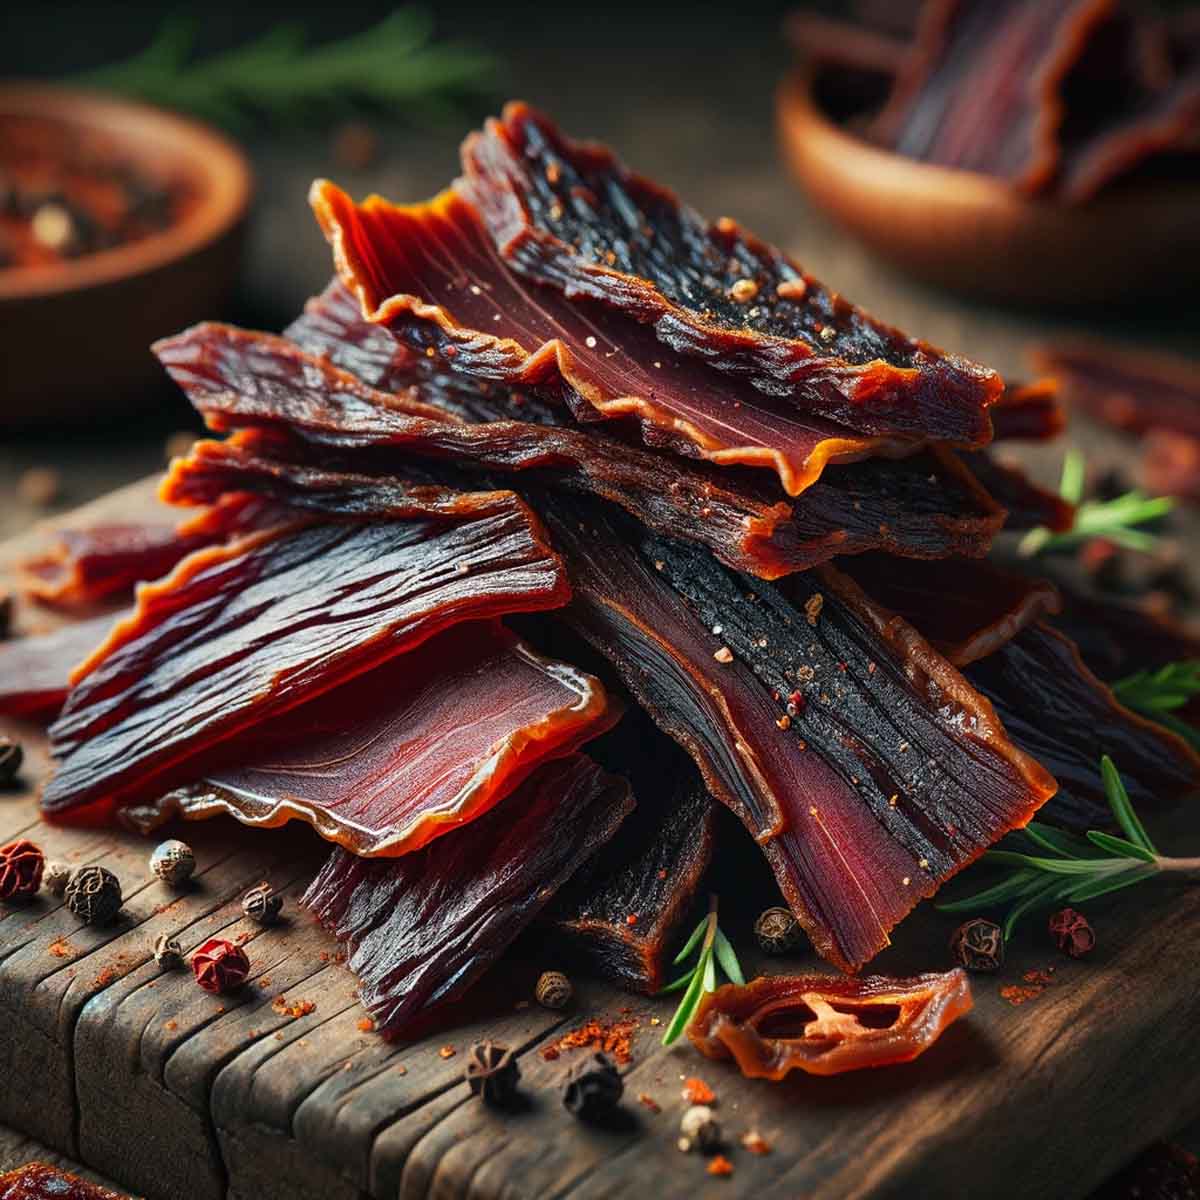 Finished beef jerky strips with a rich, dark brown color, arranged on a slate serving board.